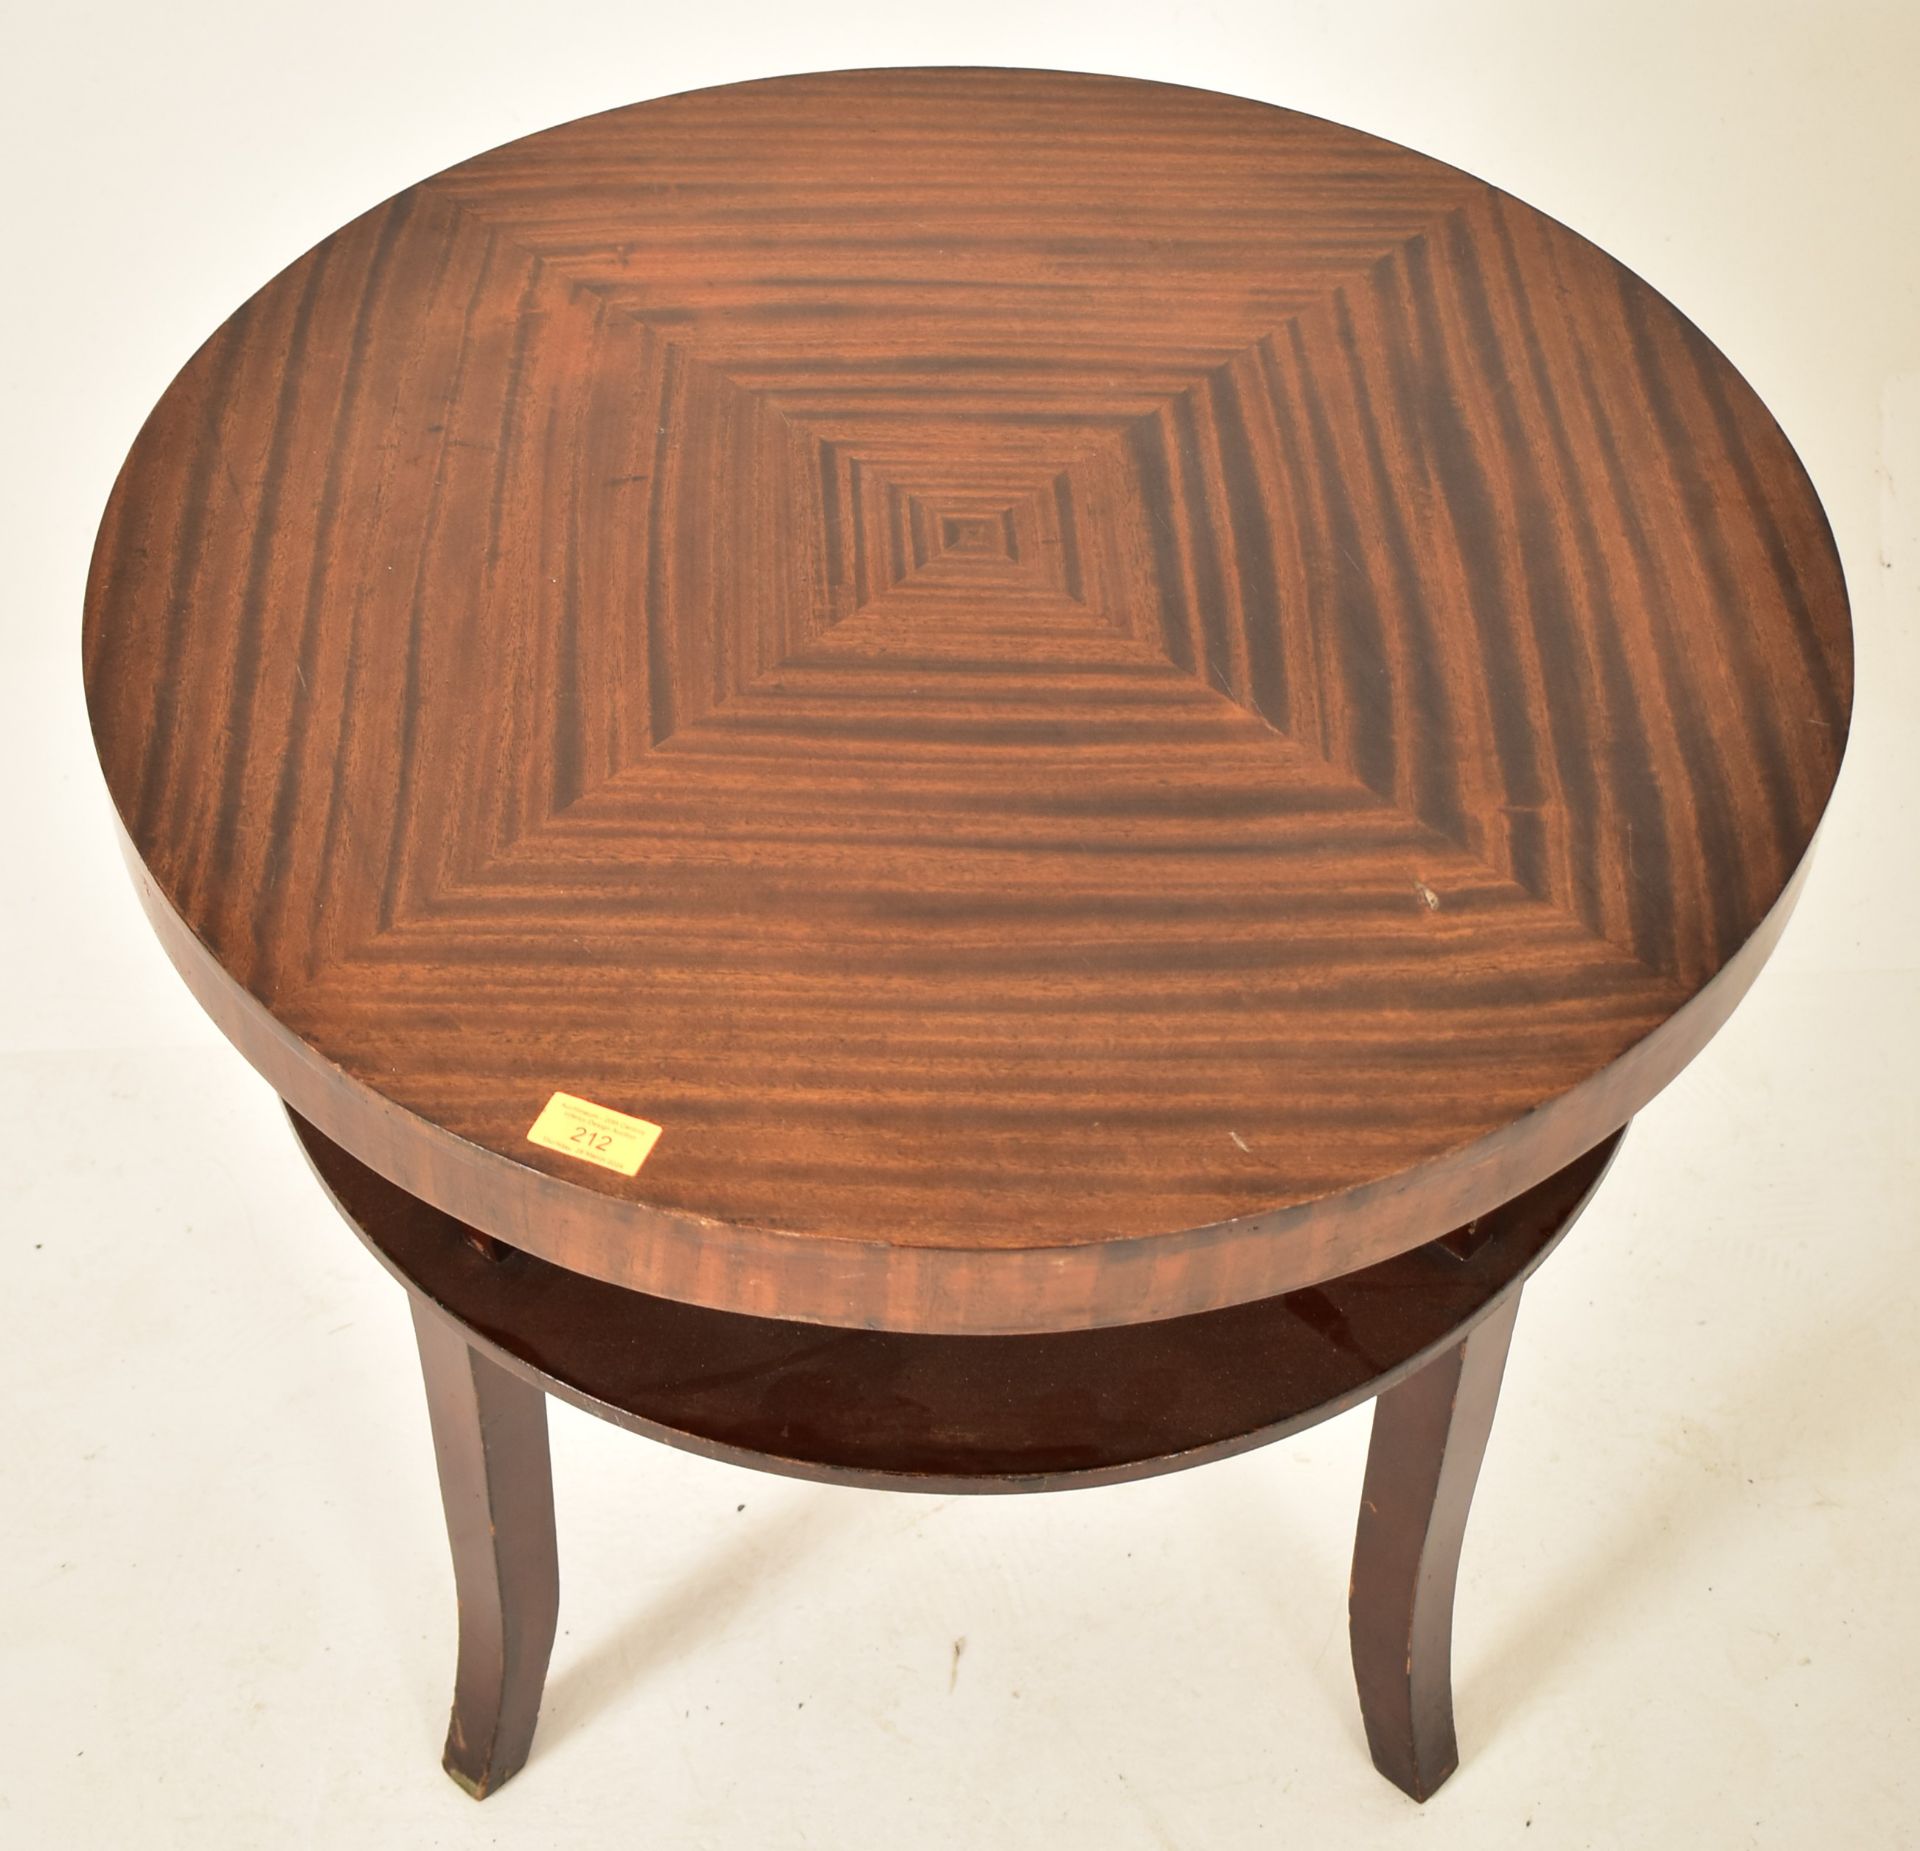 MID 20TH CENTURY WALNUT VENEERED LOW OCCASIONAL TABLE - Image 2 of 6